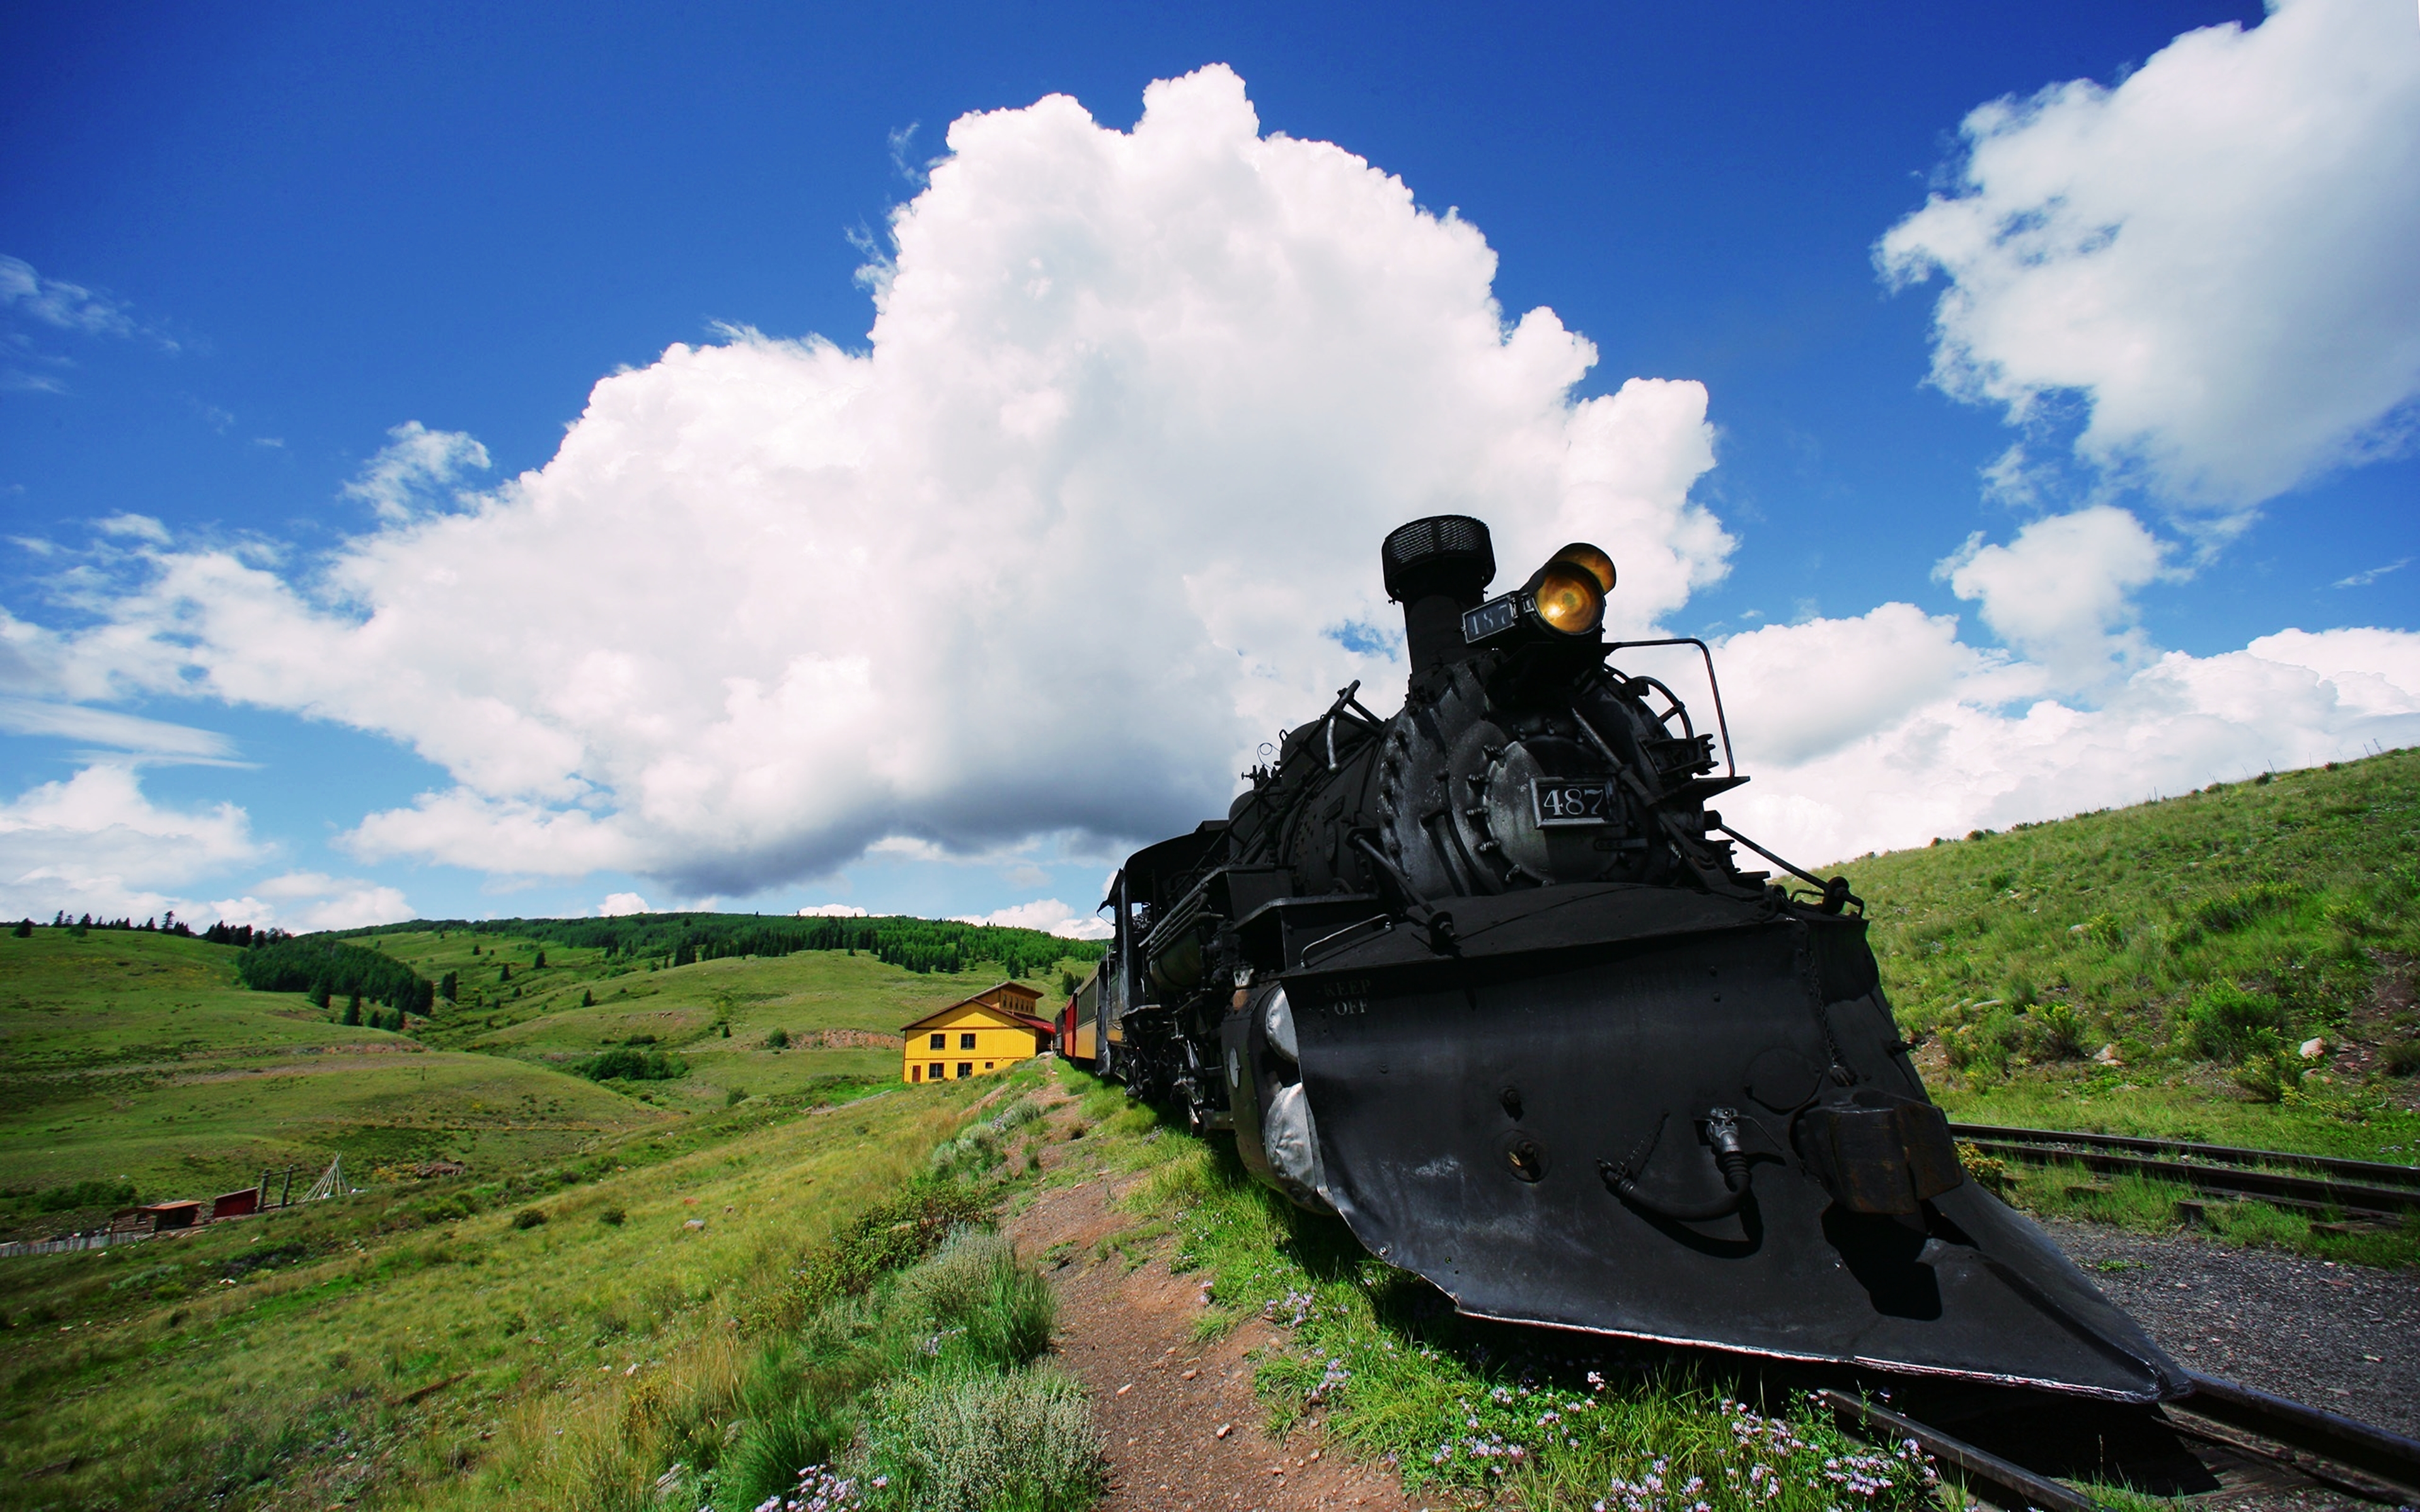 train, vehicles, countryside, landscape